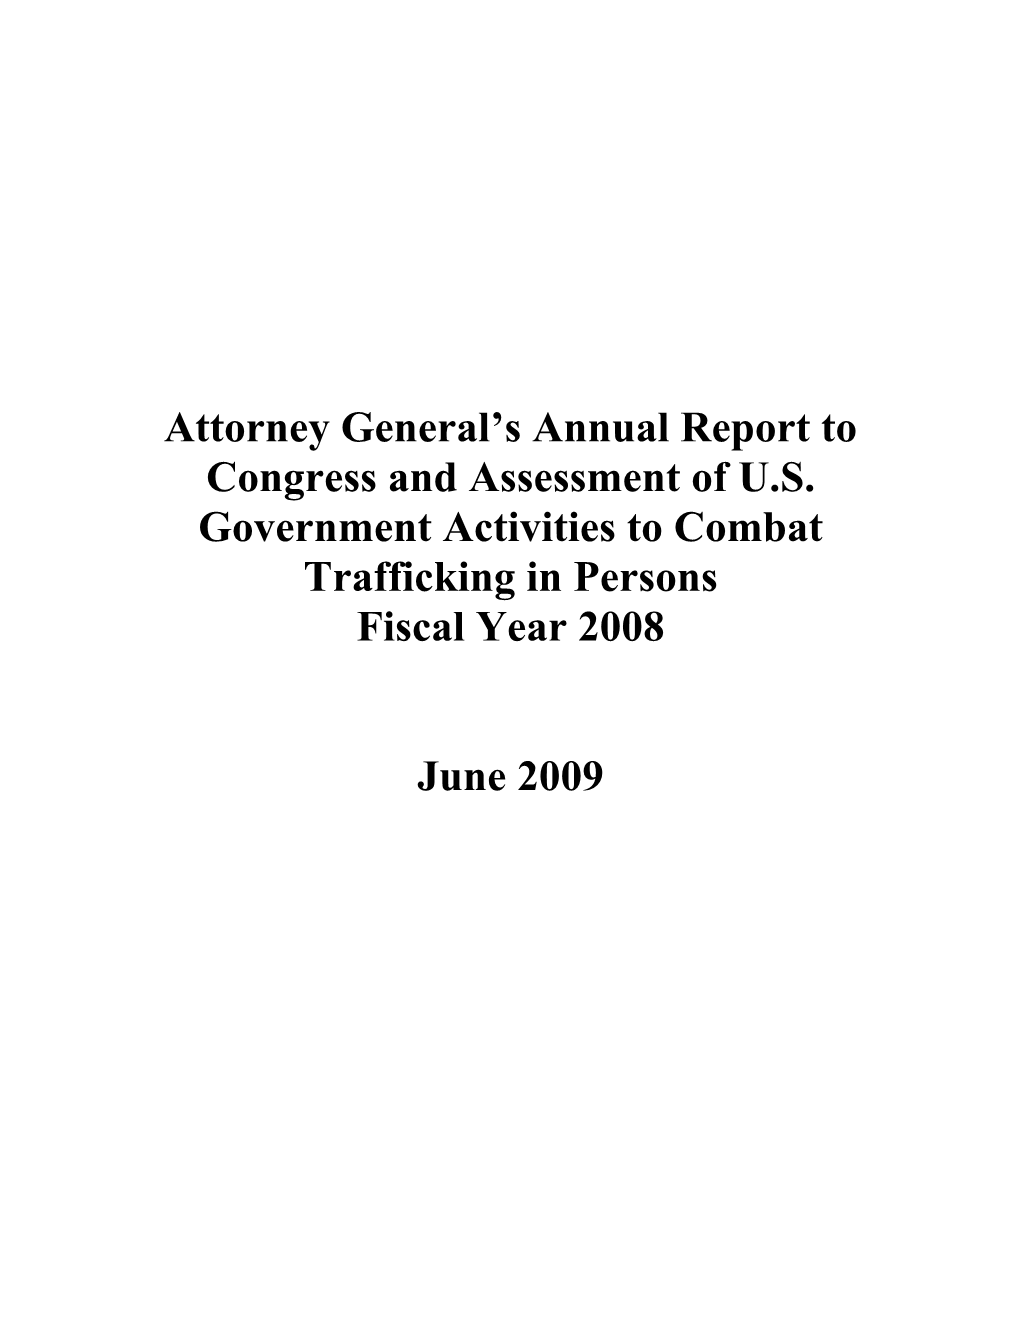 Attorney General's Annual Report to Congress And